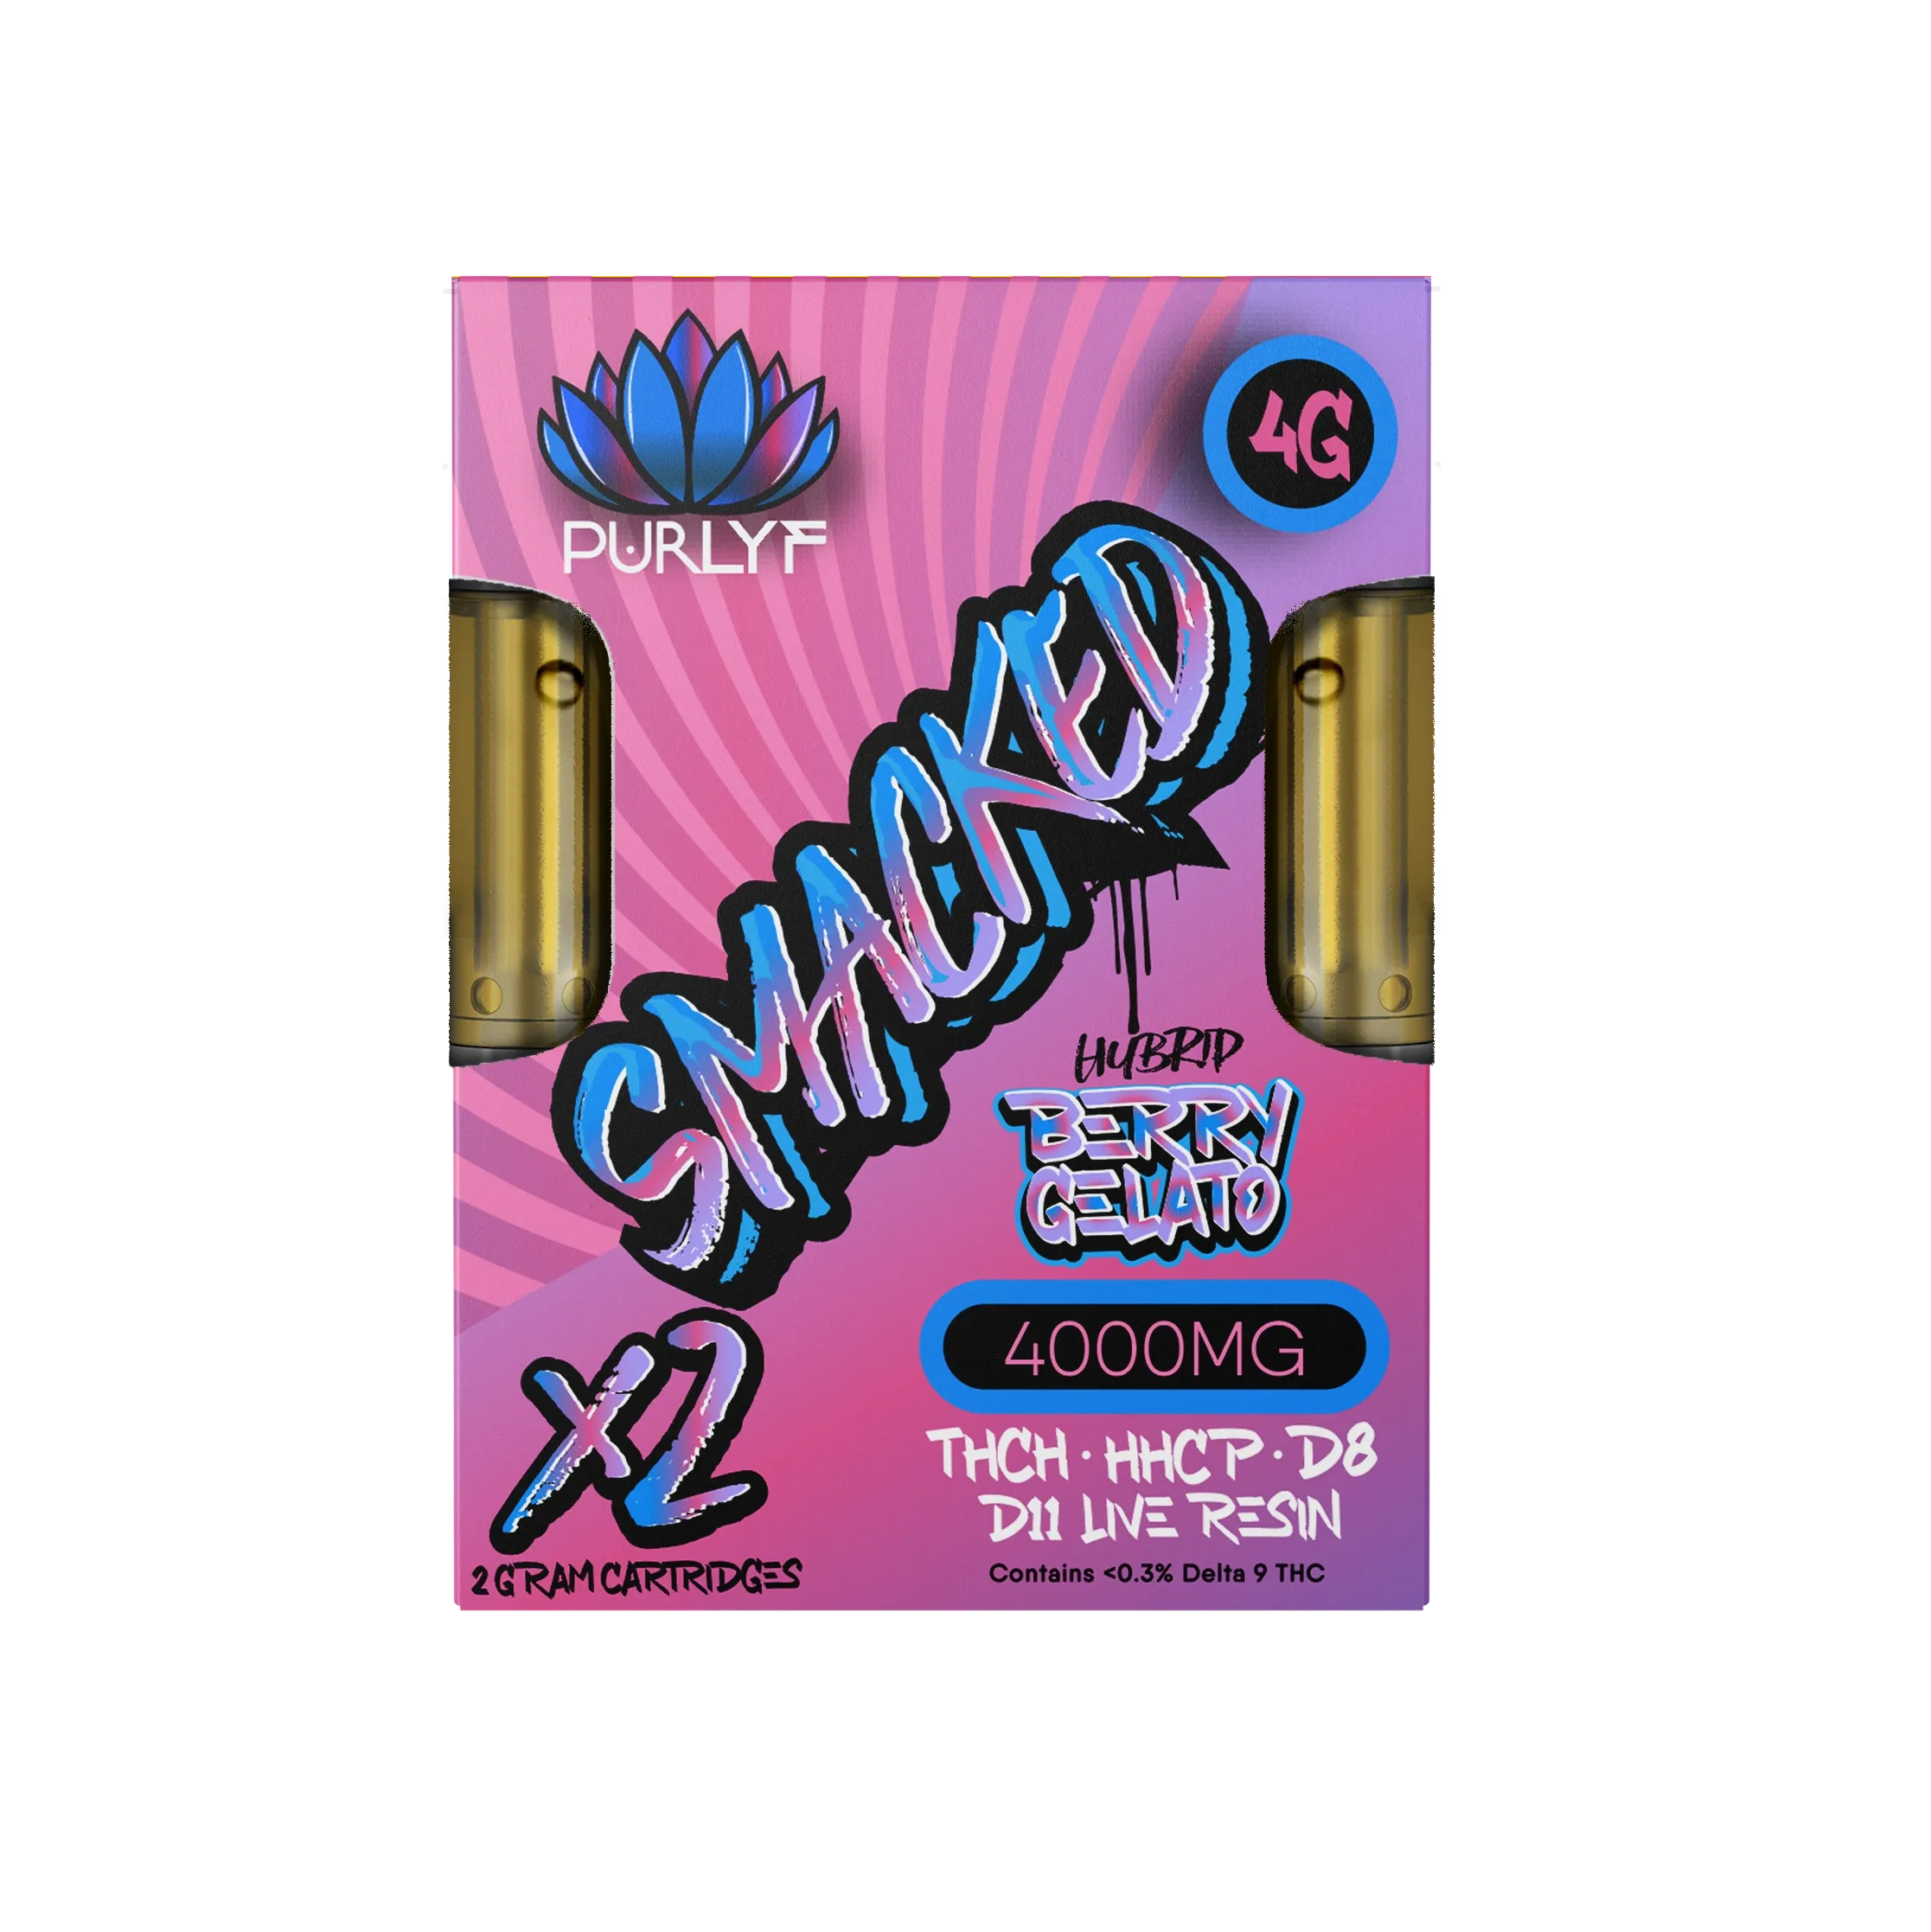 Purlyf Smacked X2 THC-H + HHC-P + D8 + D11 Live Resin Cartridges (4g) Best Price